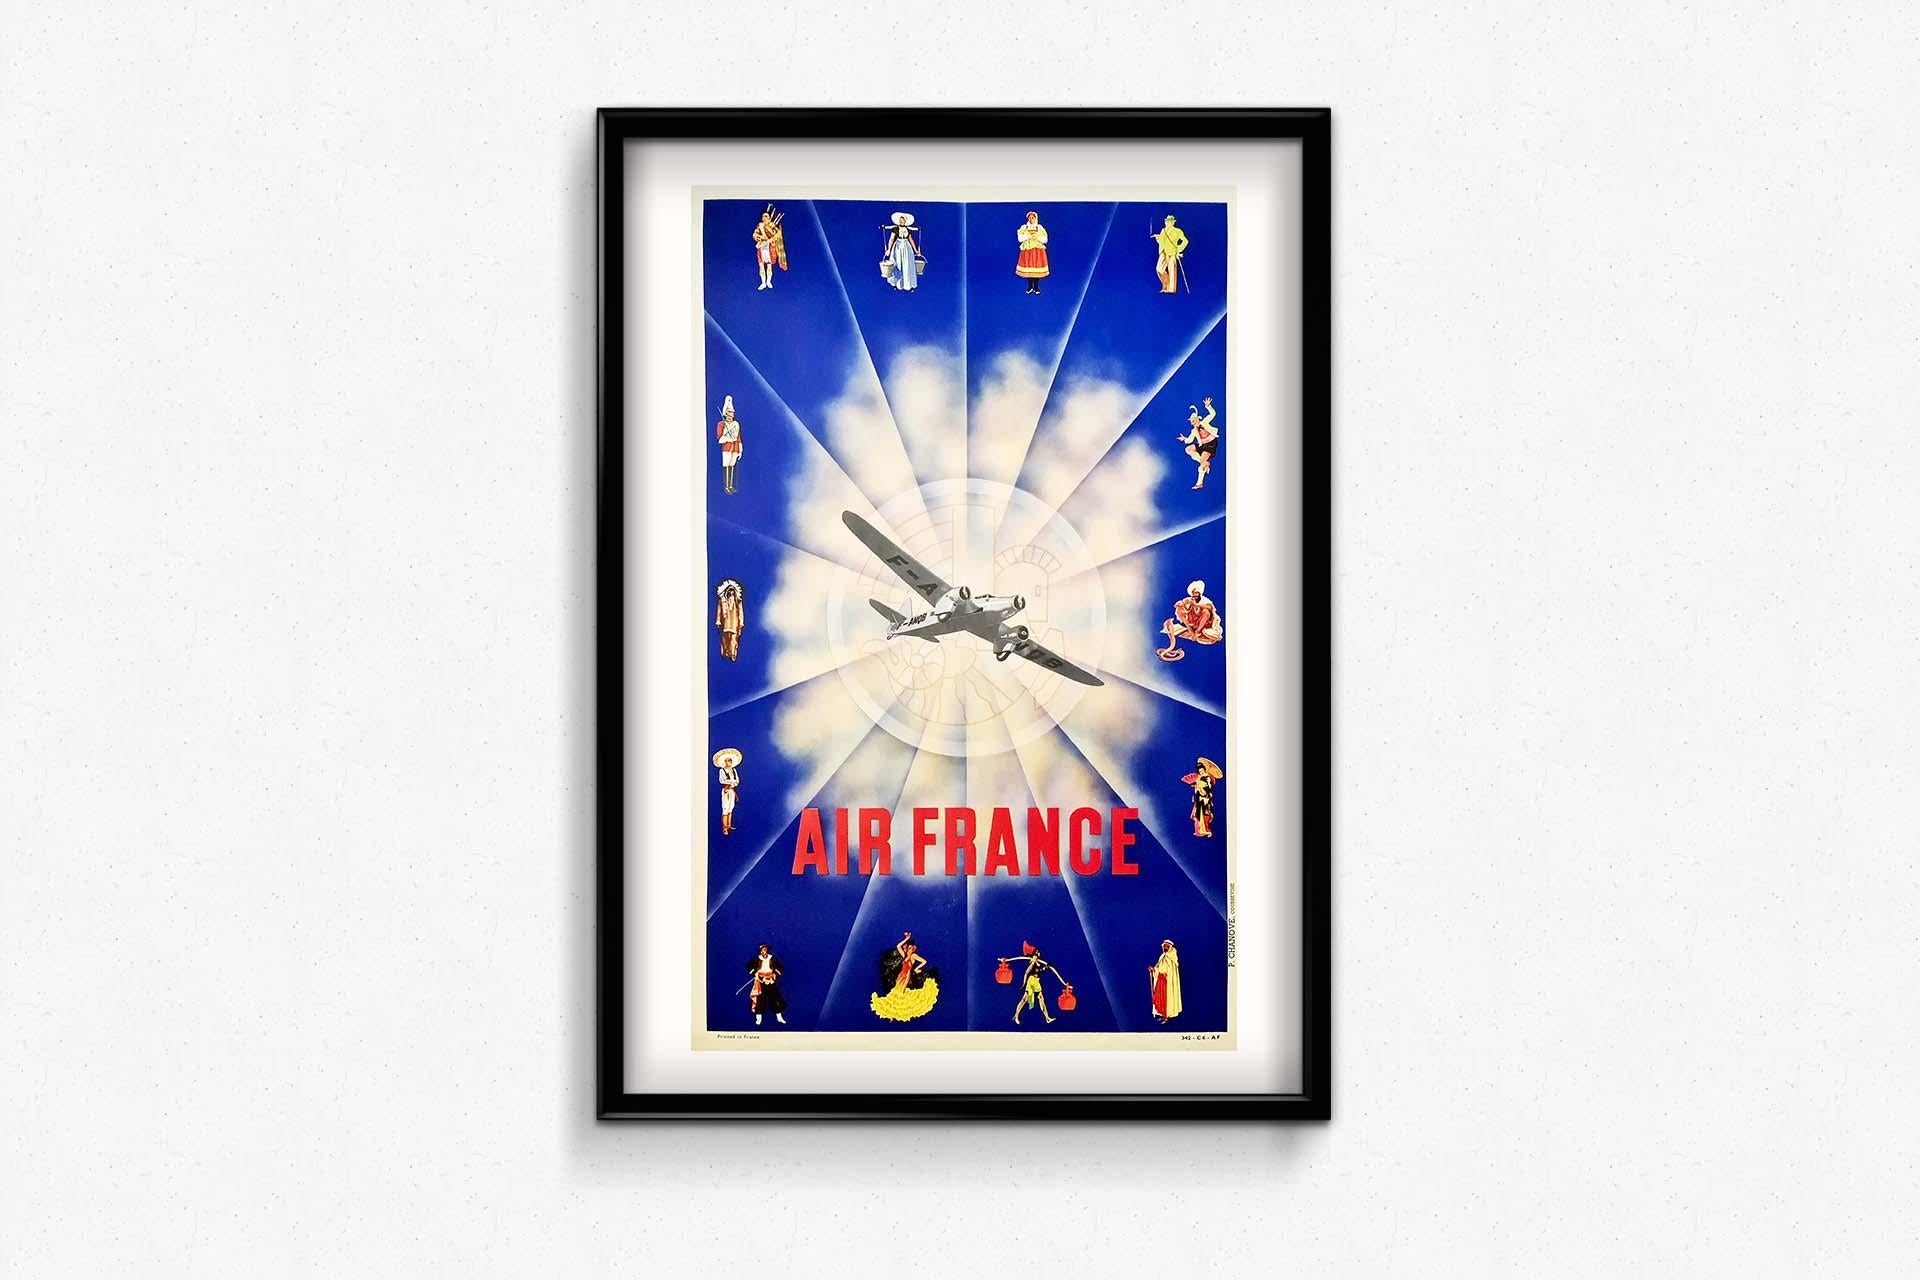 Nice original poster of Air France from 1938.
Posters are essential to the communication of Air France. It is important to note that Air France has one of the largest collections in the world with over 1500 posters created by the greatest